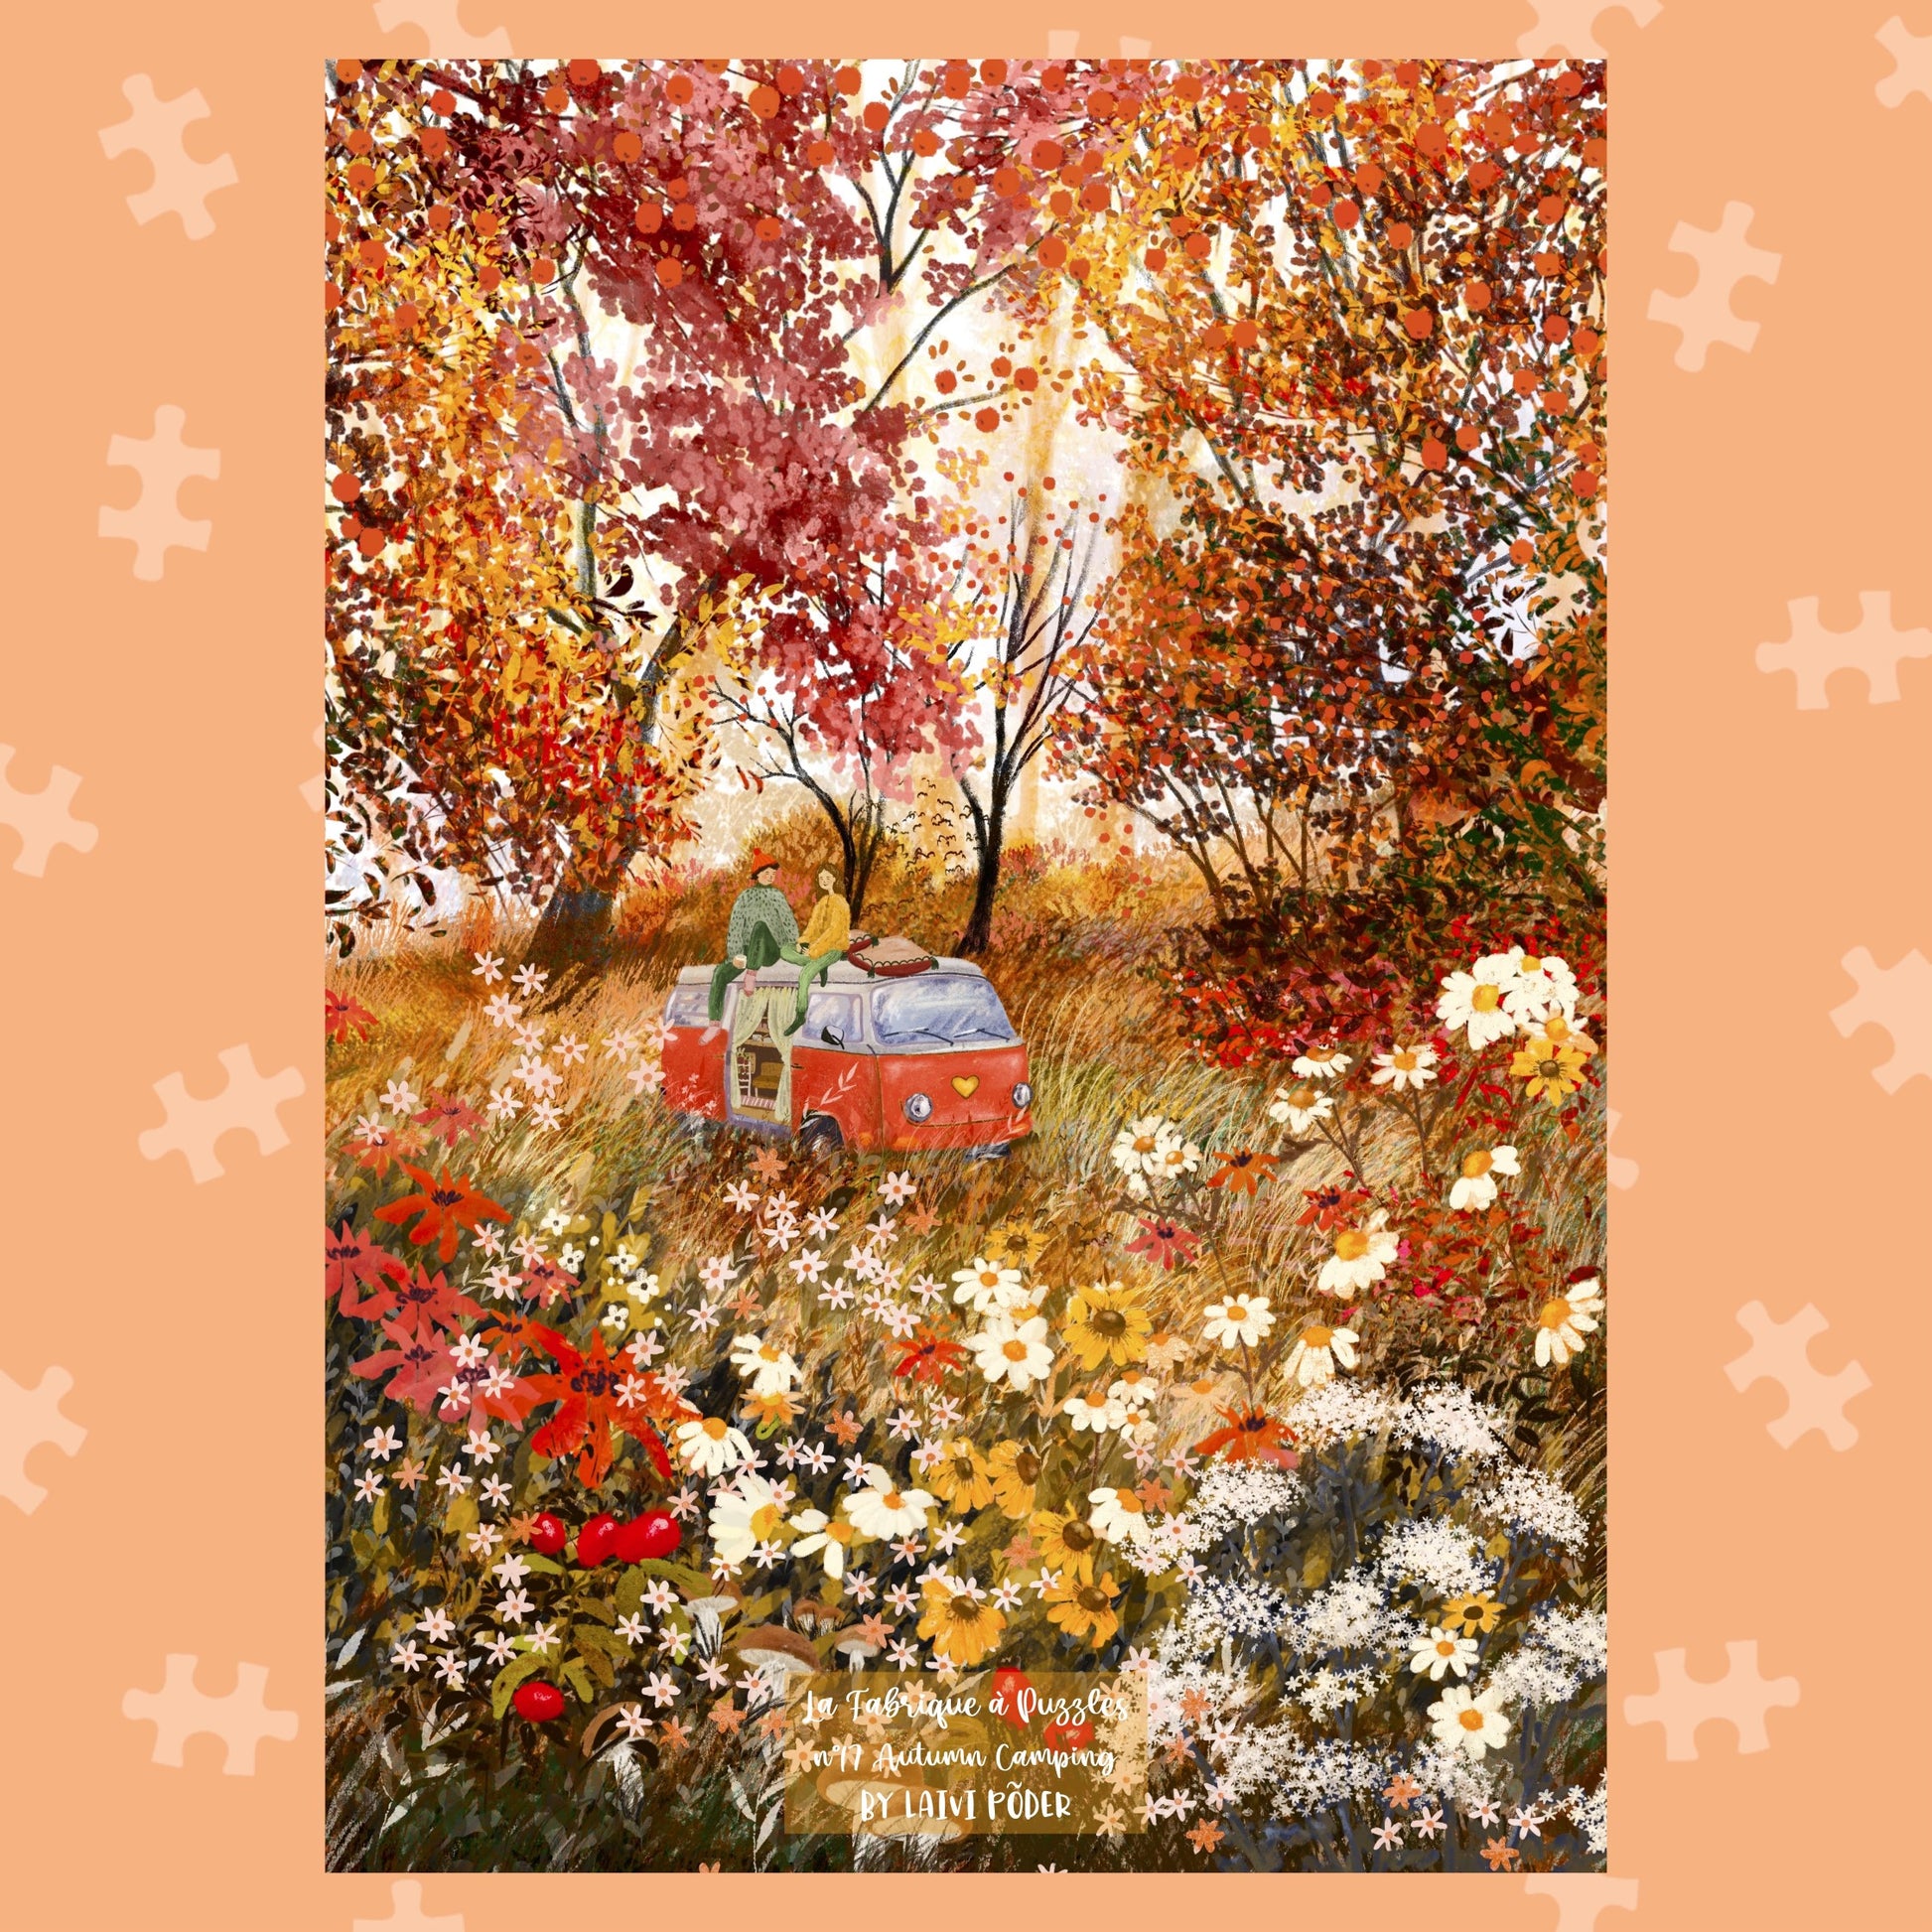 Puzzle n#17 Autumn Camping 500 pieces by Laivi Põder